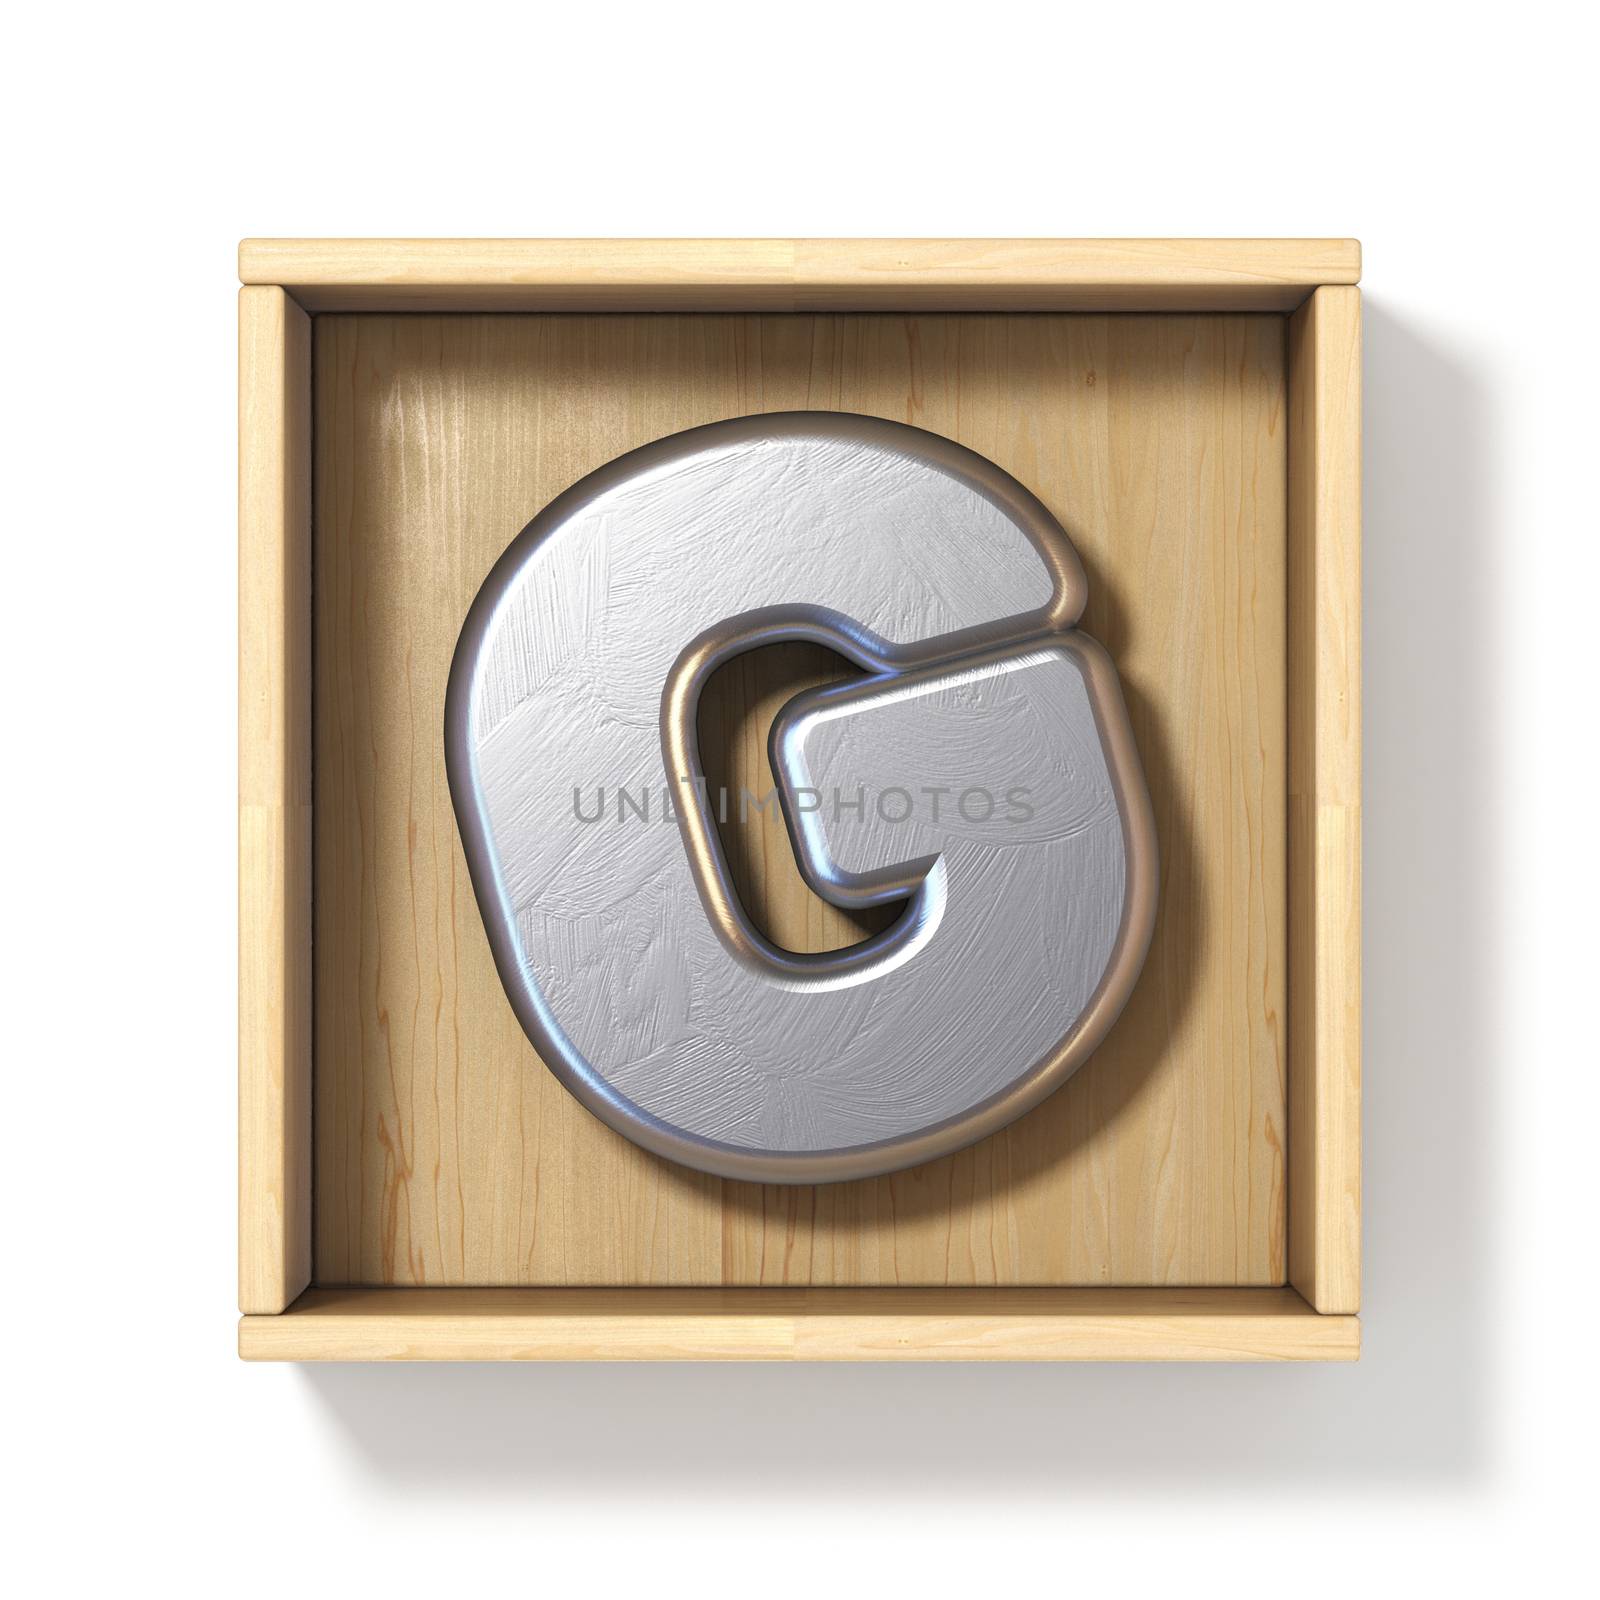 Silver metal letter G in wooden box 3D render illustration isolated on white background